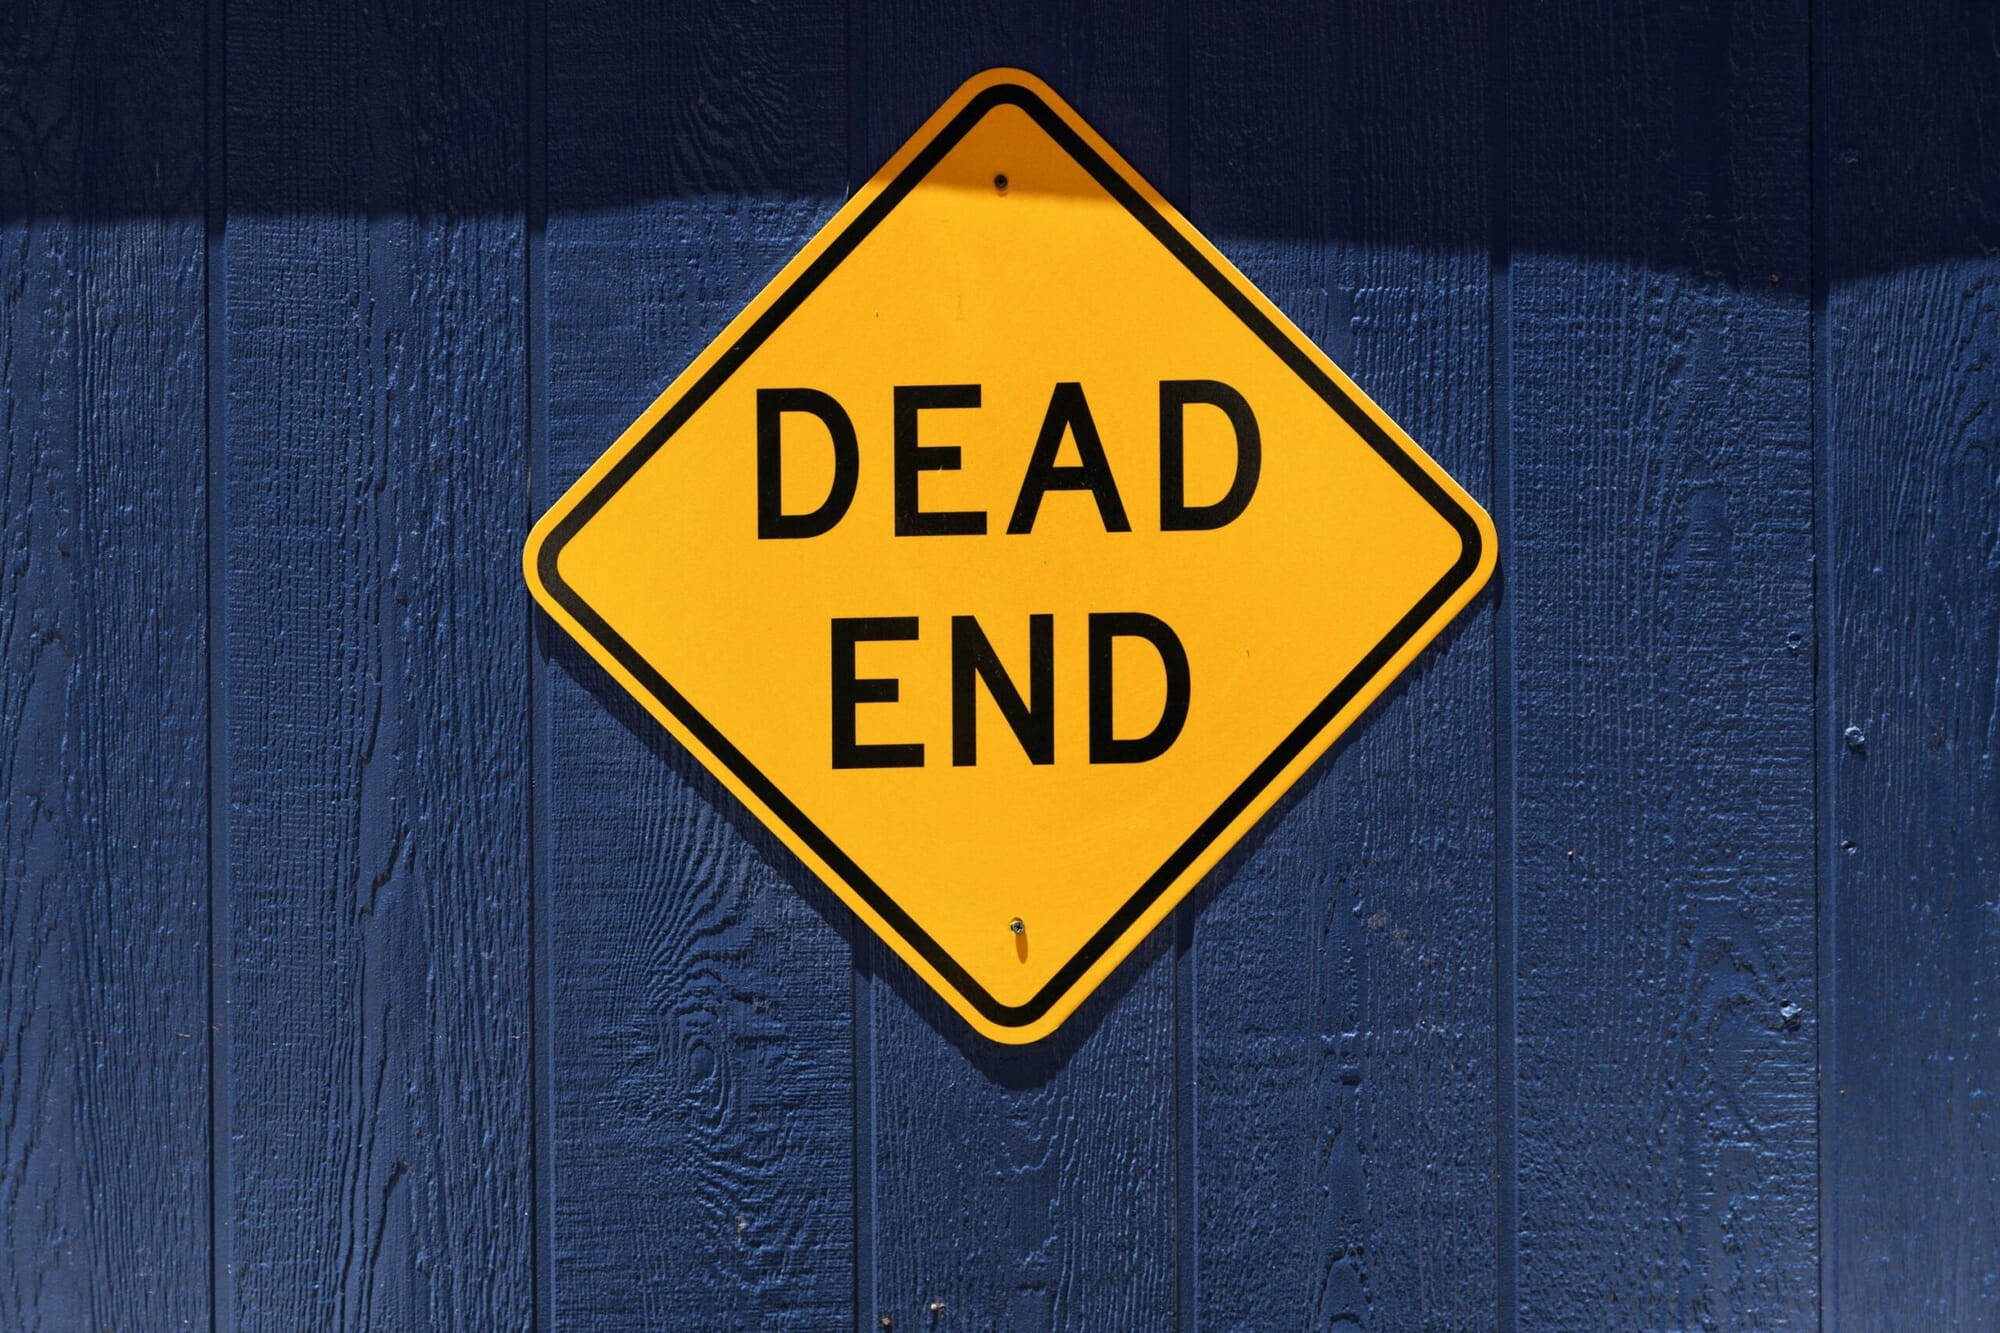 dead-end-sign-scaled.jpg?w=2000&h=1333&scale